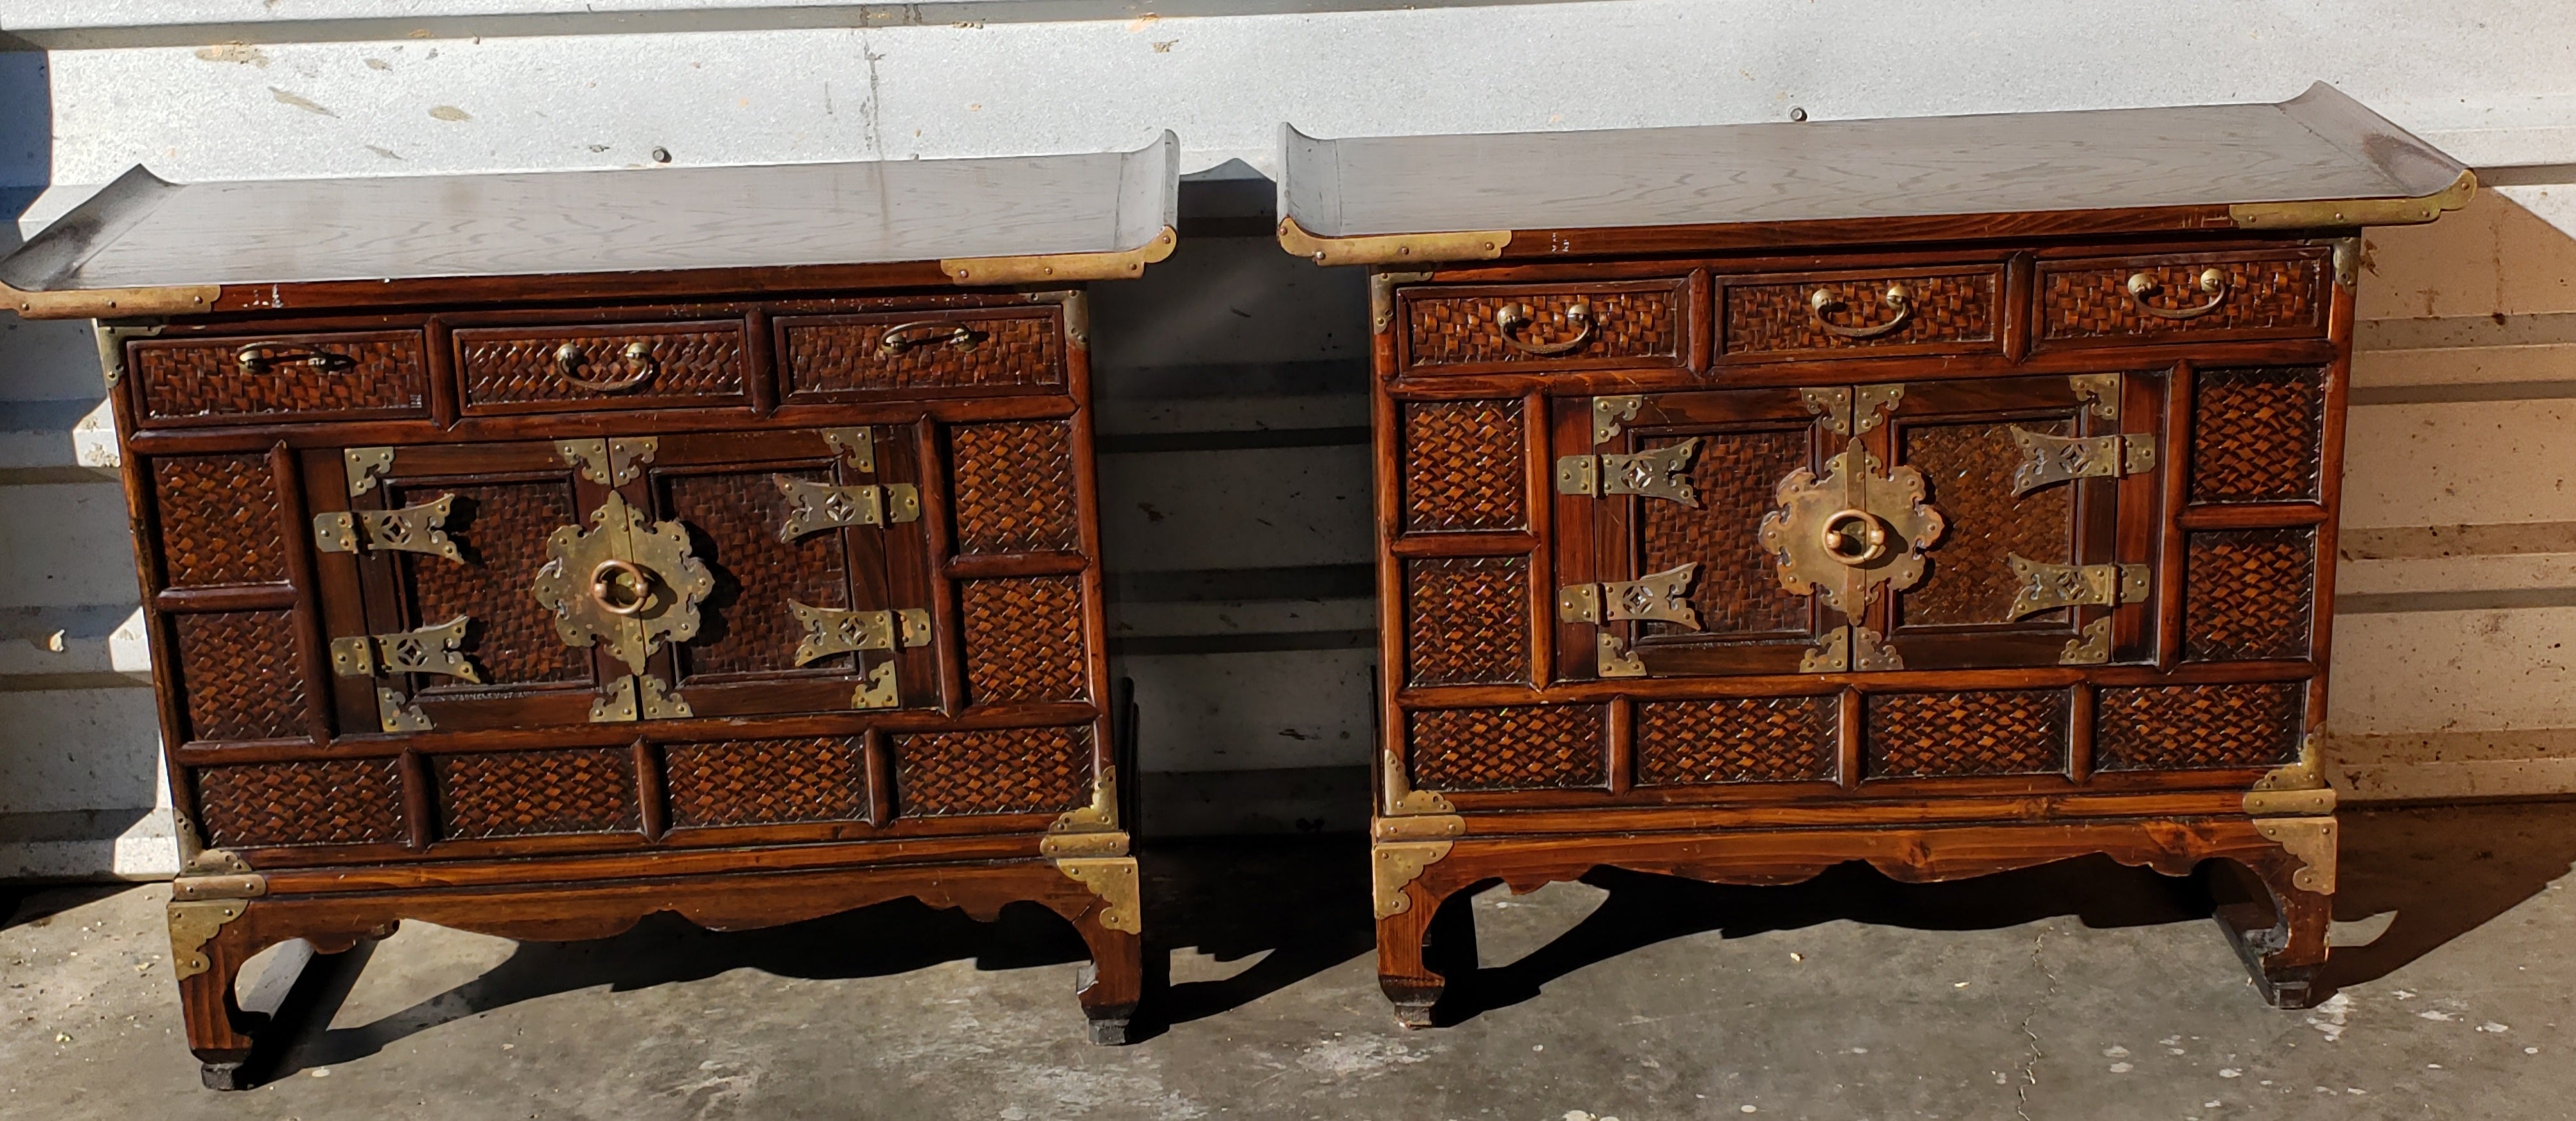 A Pair of Antique Asian scholar's chests /side tables configured with 3 upper drawers and lower cabinet compartments. Beautifully appointed with striking drop pulls and wicker face drawers on top as well as elegant start medallion hasp and strap